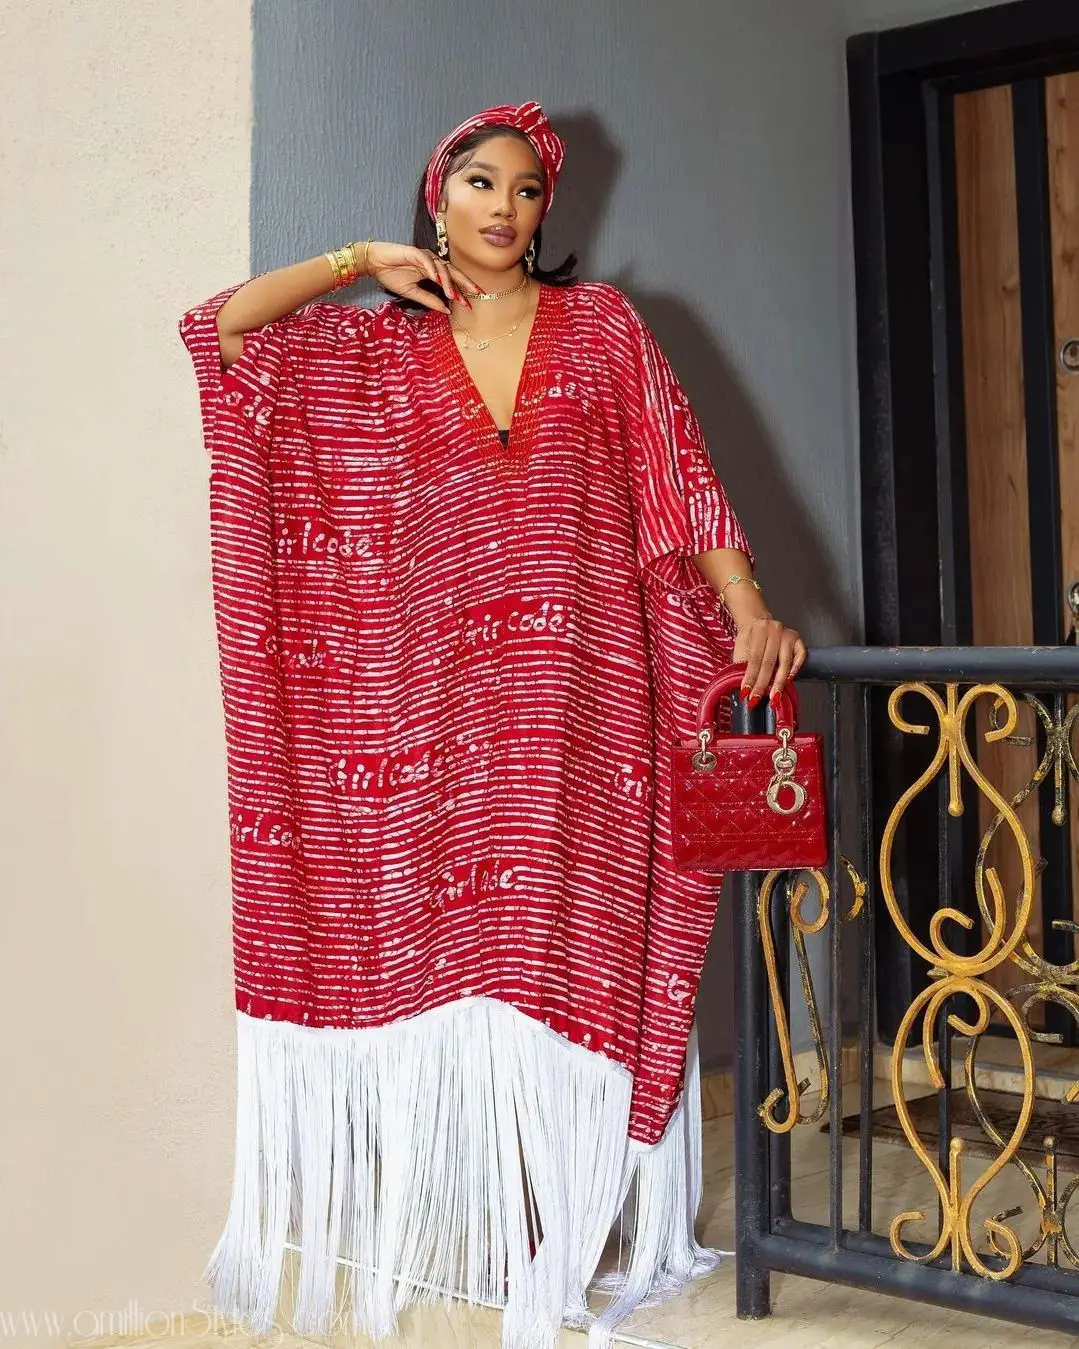 Give It Up For These Boubou (Rich Aunty) Styles